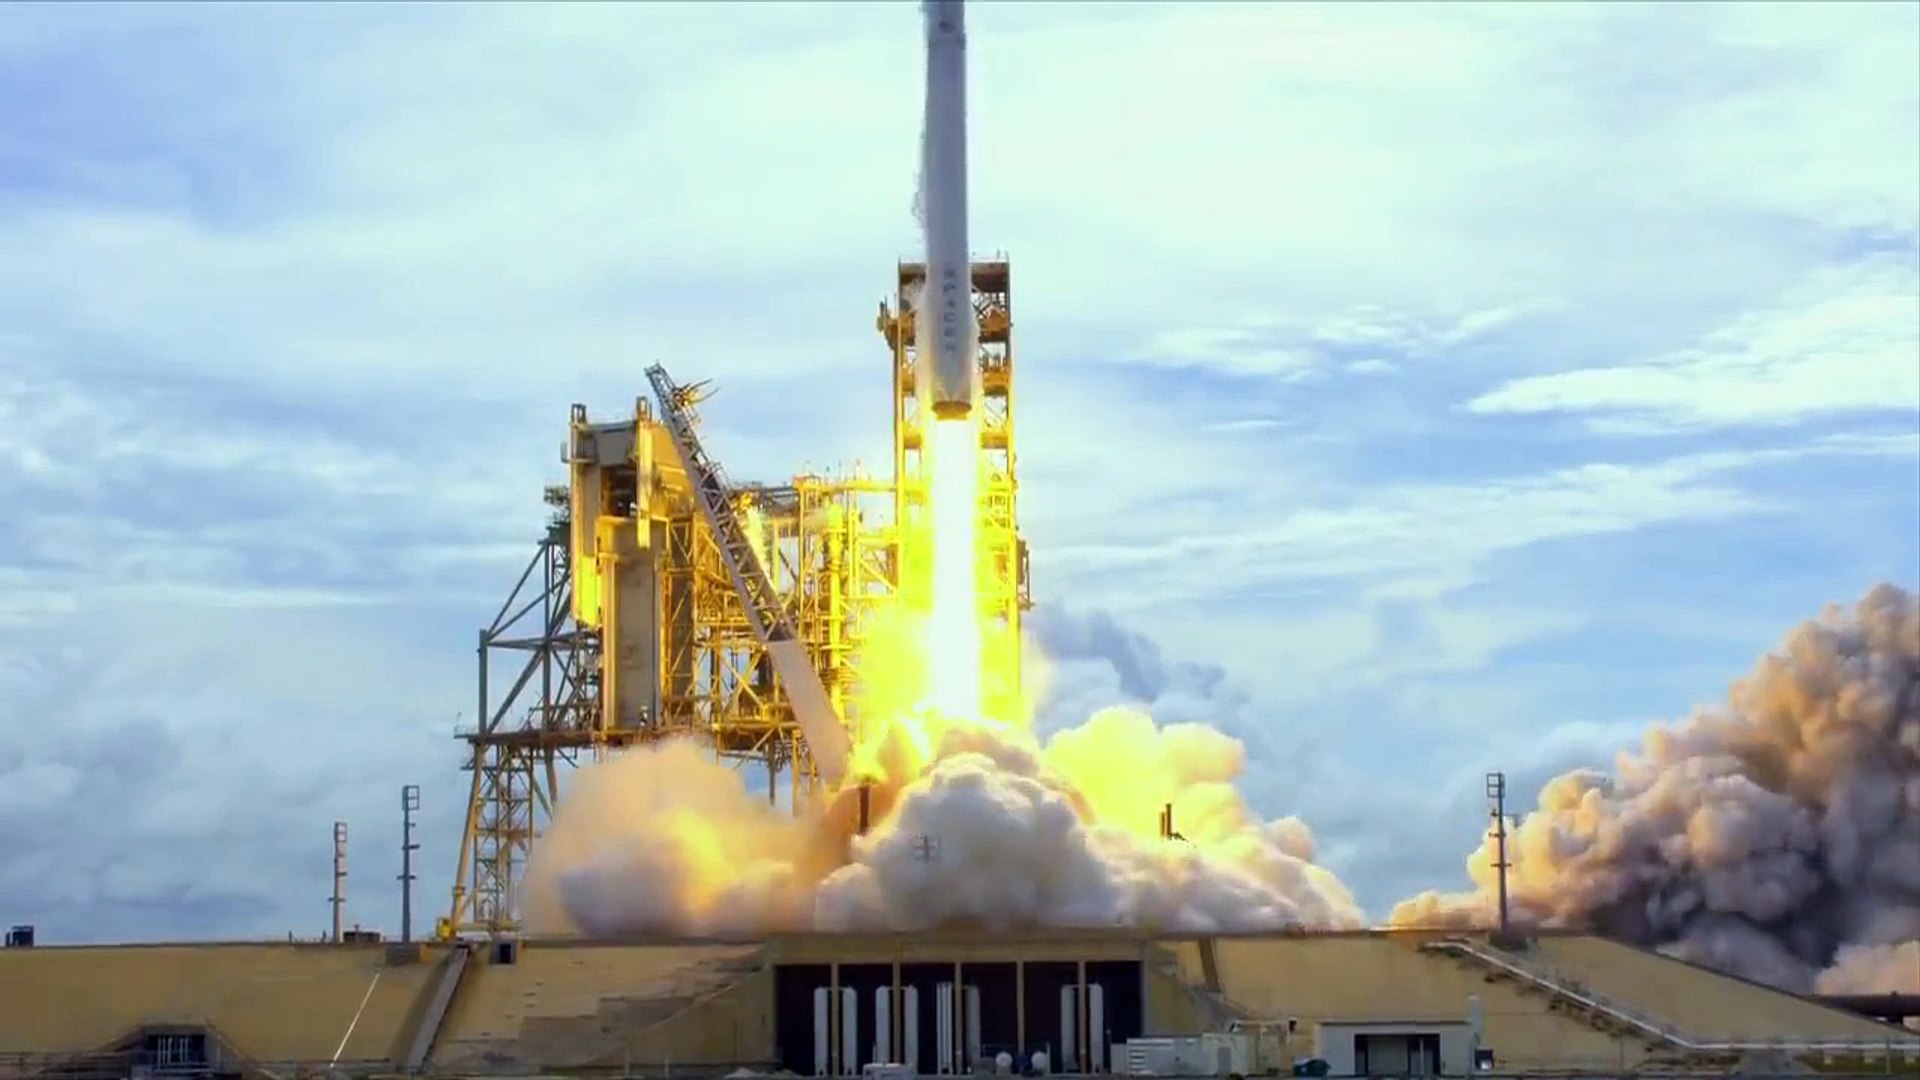 SpaceX has successfully launched its Falcon 9 rocket and the Dragon spacecraft to orbit.